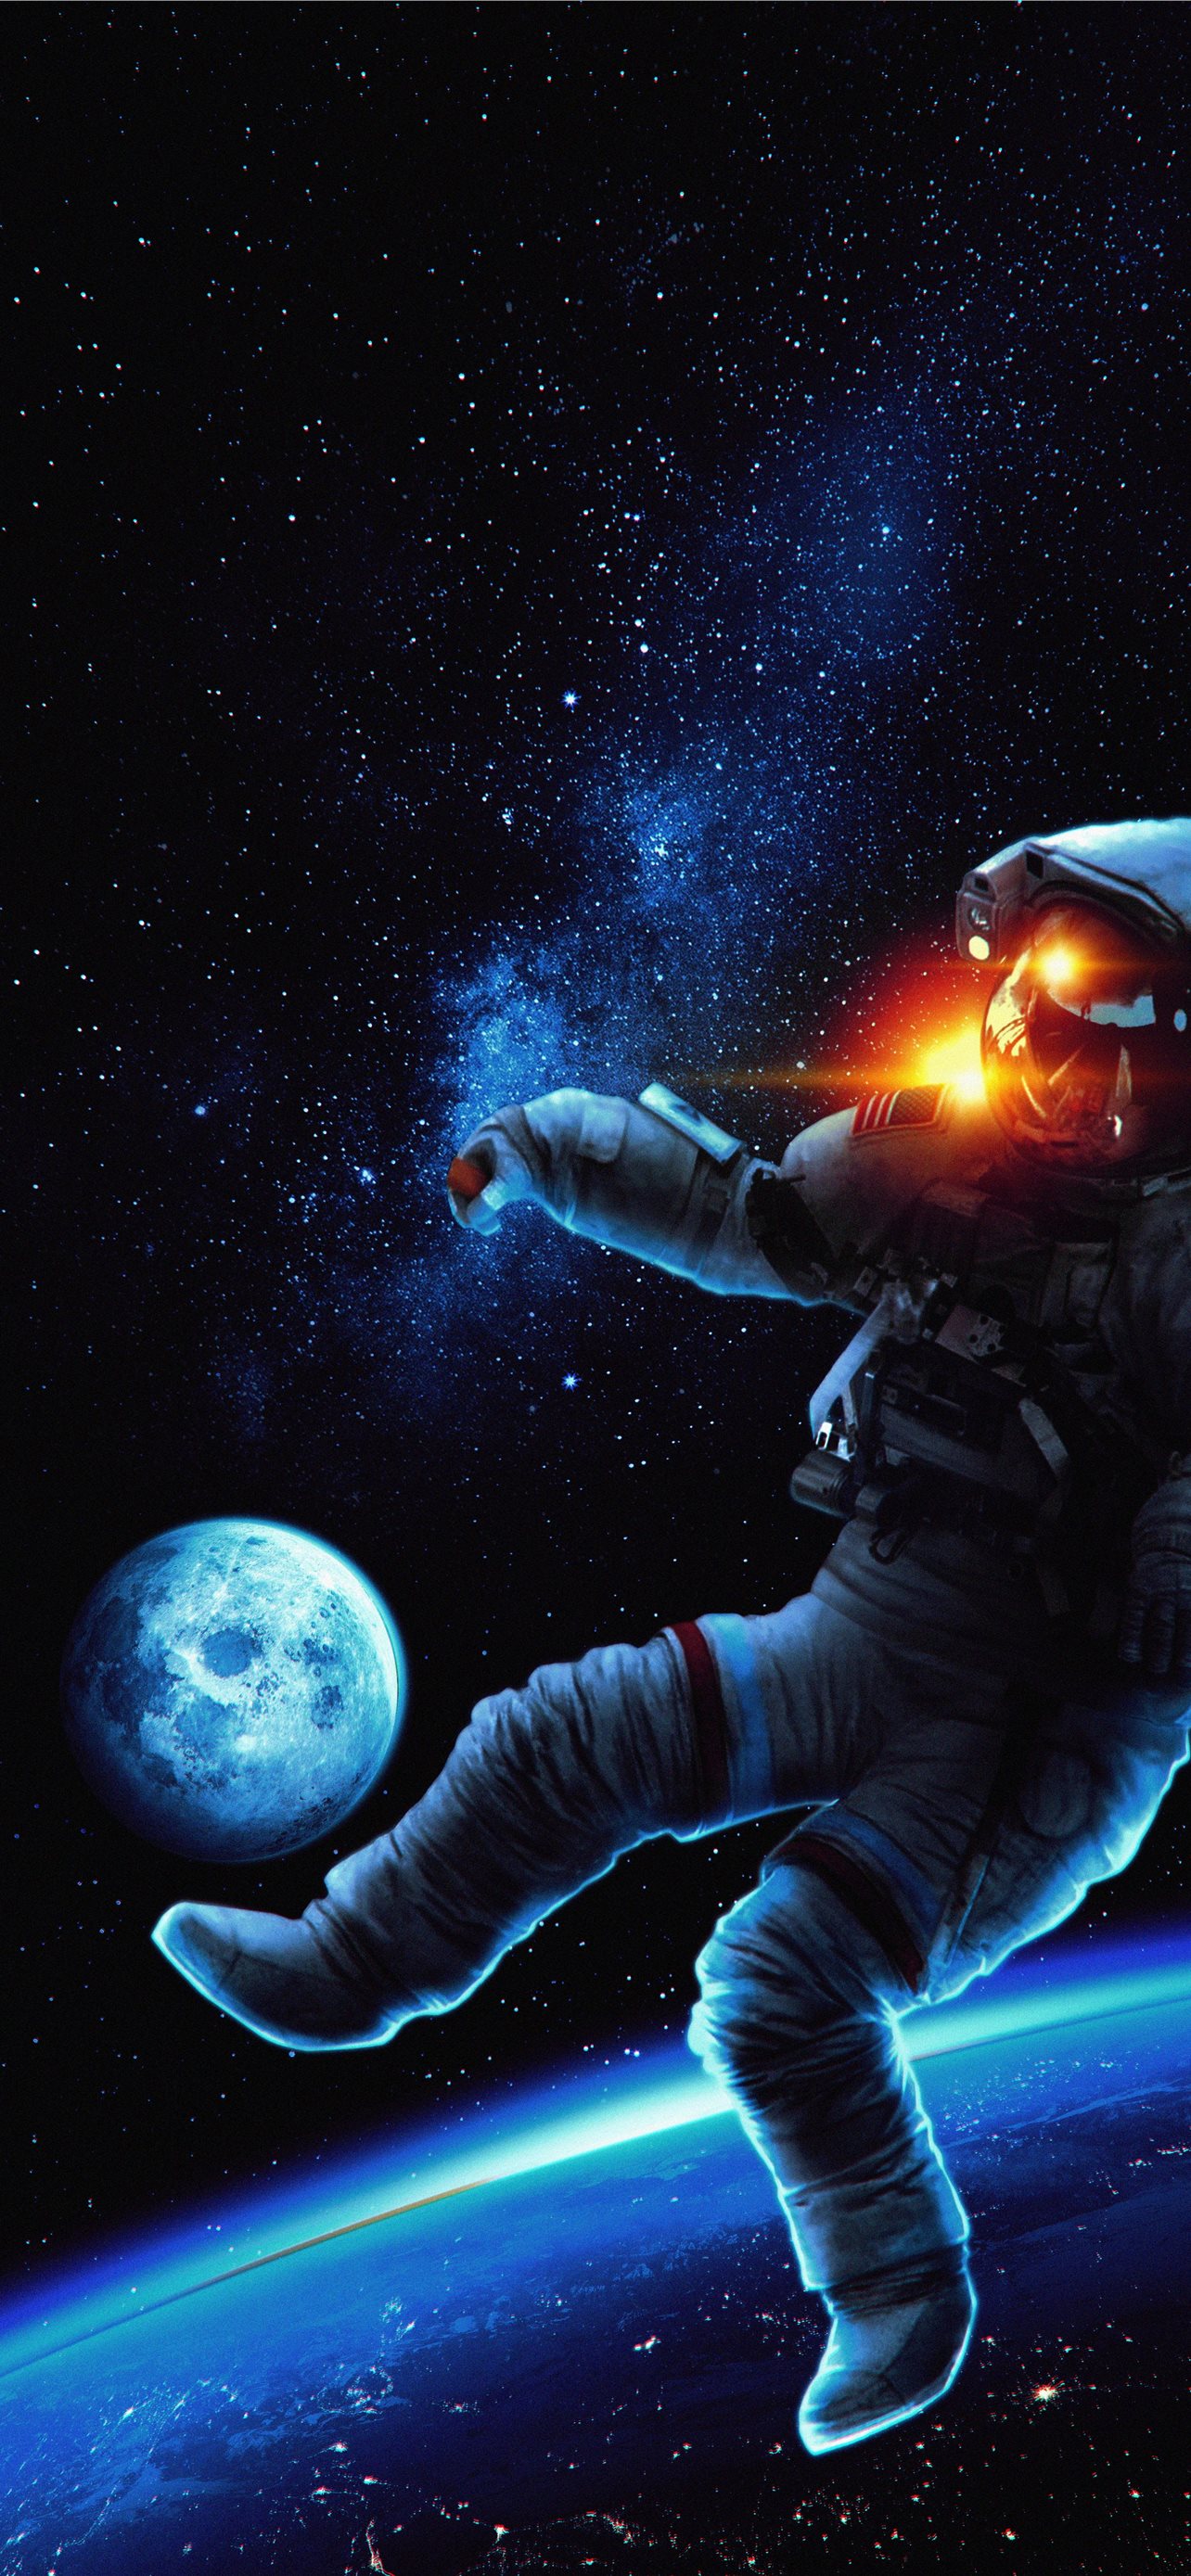 Astronaut watching the world on the rock he sits on 4K wallpaper download